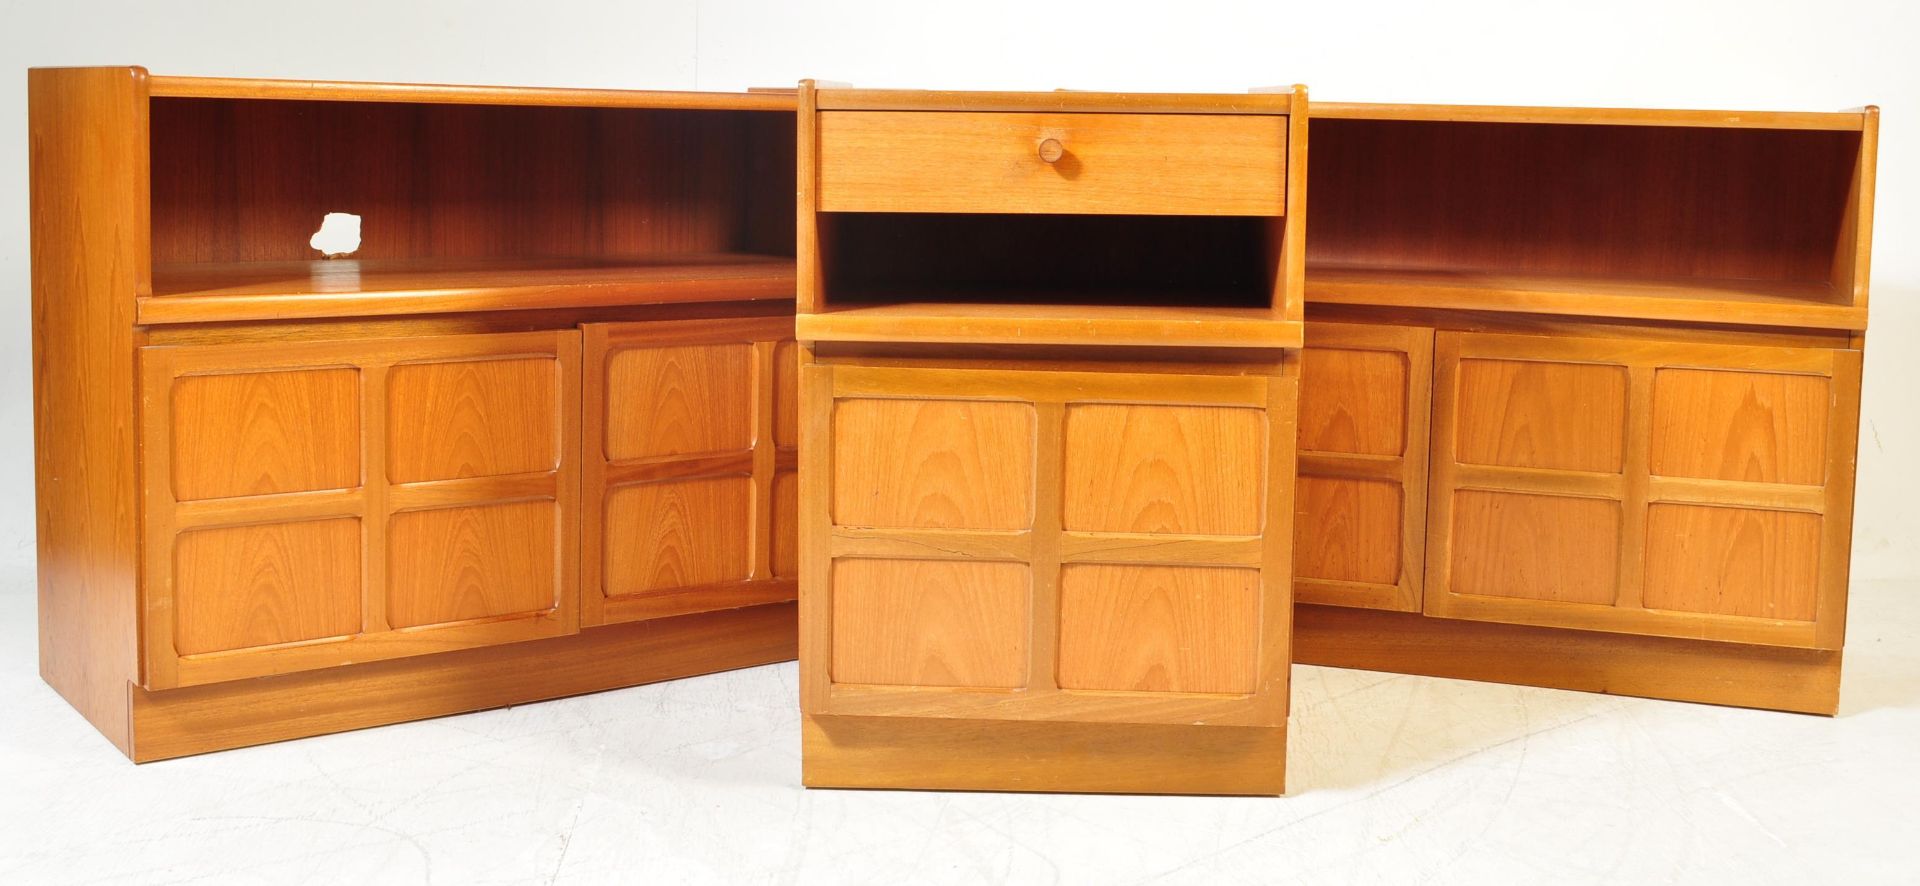 TWO TEAK WOOD LOW ENTERTAINMENT CABINETS AND BEDSIDE CABINET BY NATHAN